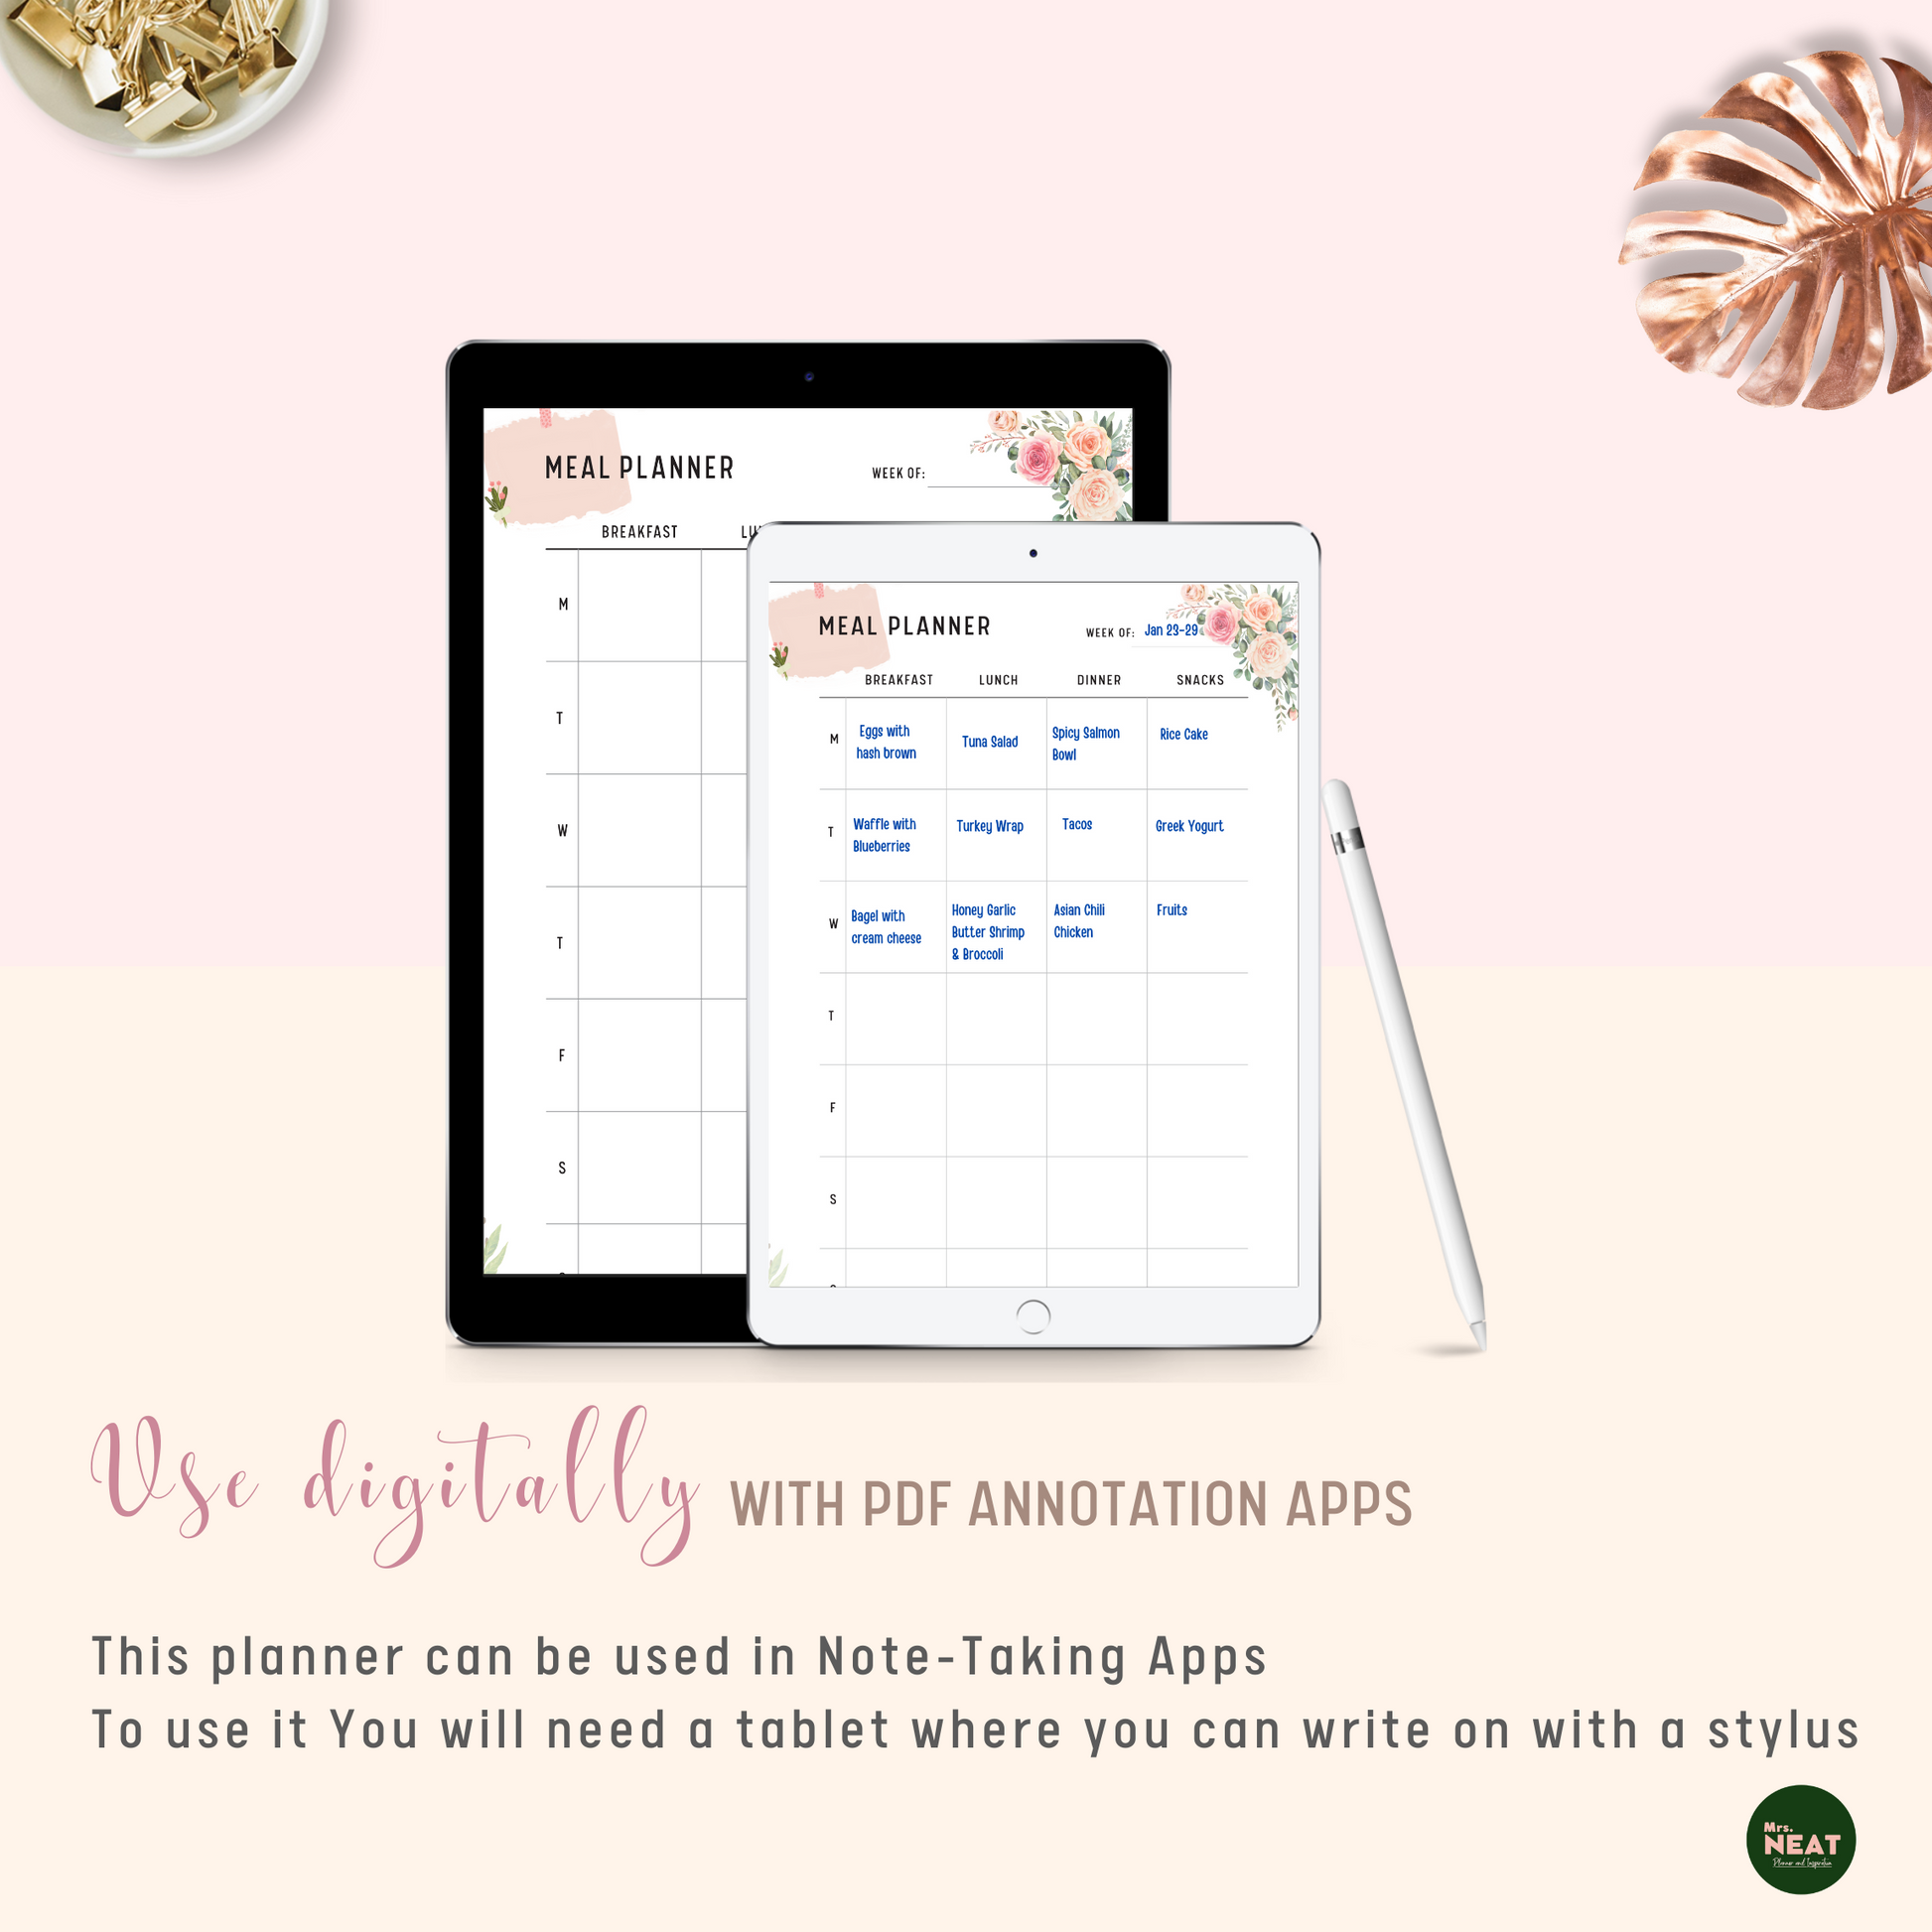 Cute Pink Floral Weekly Meal Planner used Digitally with Tablet and Stylus